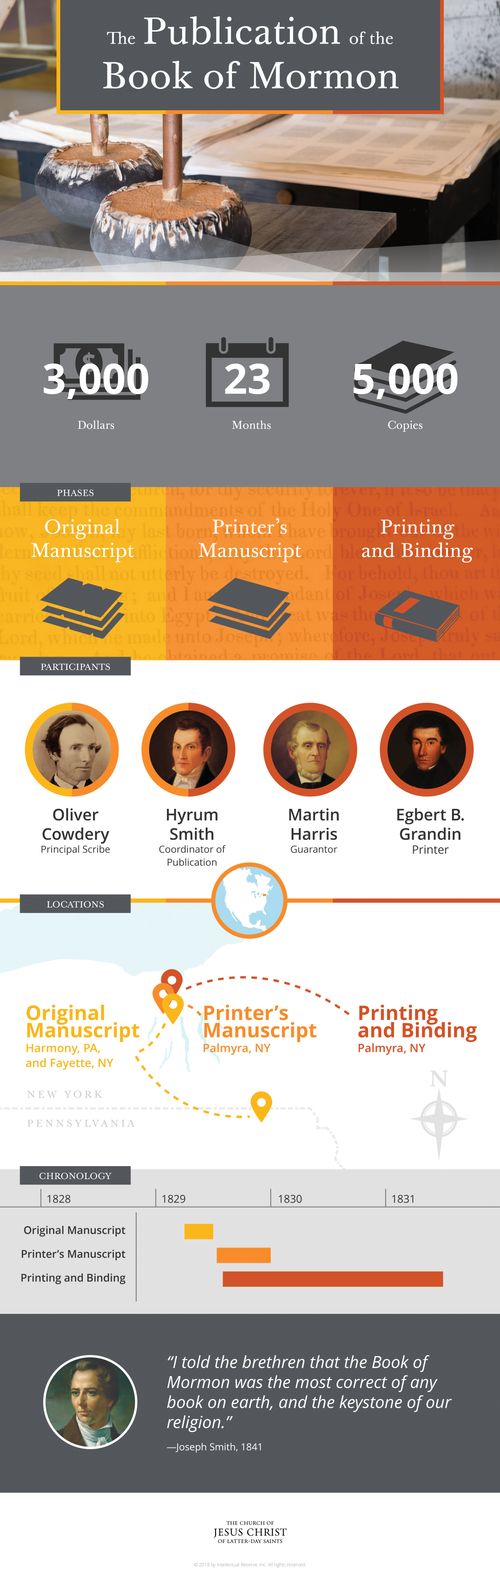 An infographic of the publication of the Book of Mormon